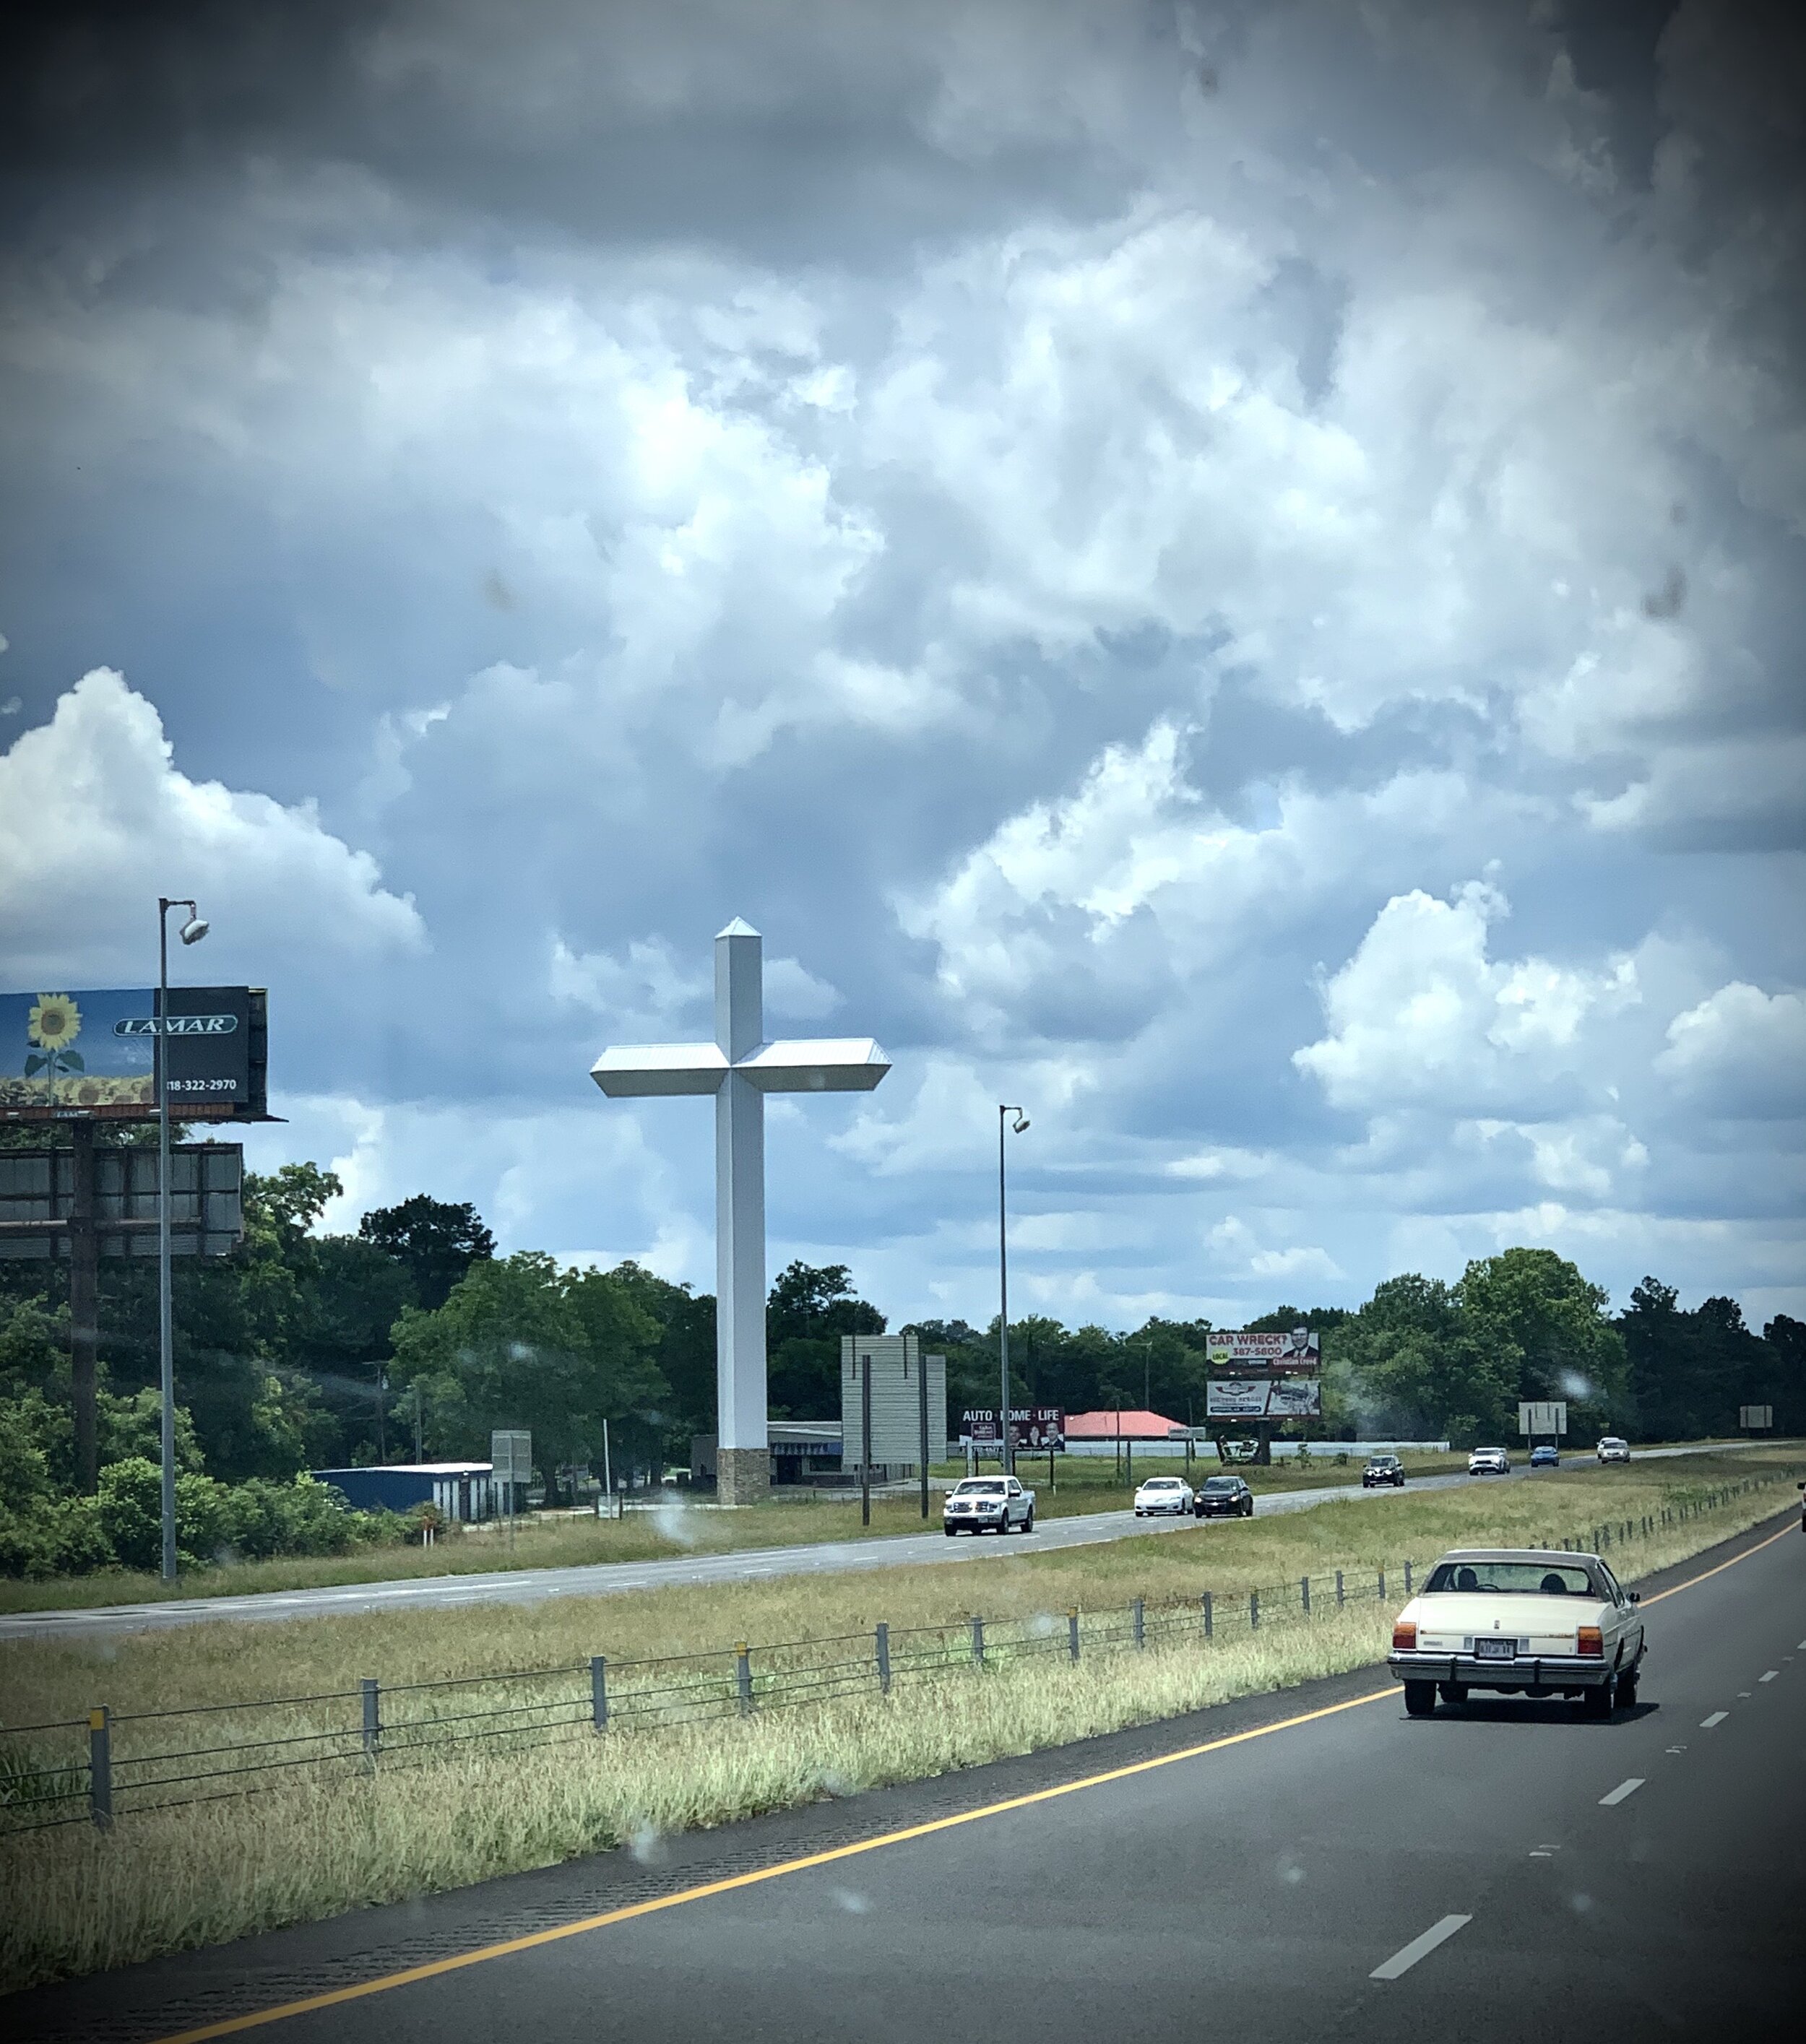  Here and there along the Texas interstates, we come across huge crosses like this one. They say everything is bigger in Texas! To us, it’s a welcome reminder of our faith and that God is bigger than all the concerns and worries of this world.  